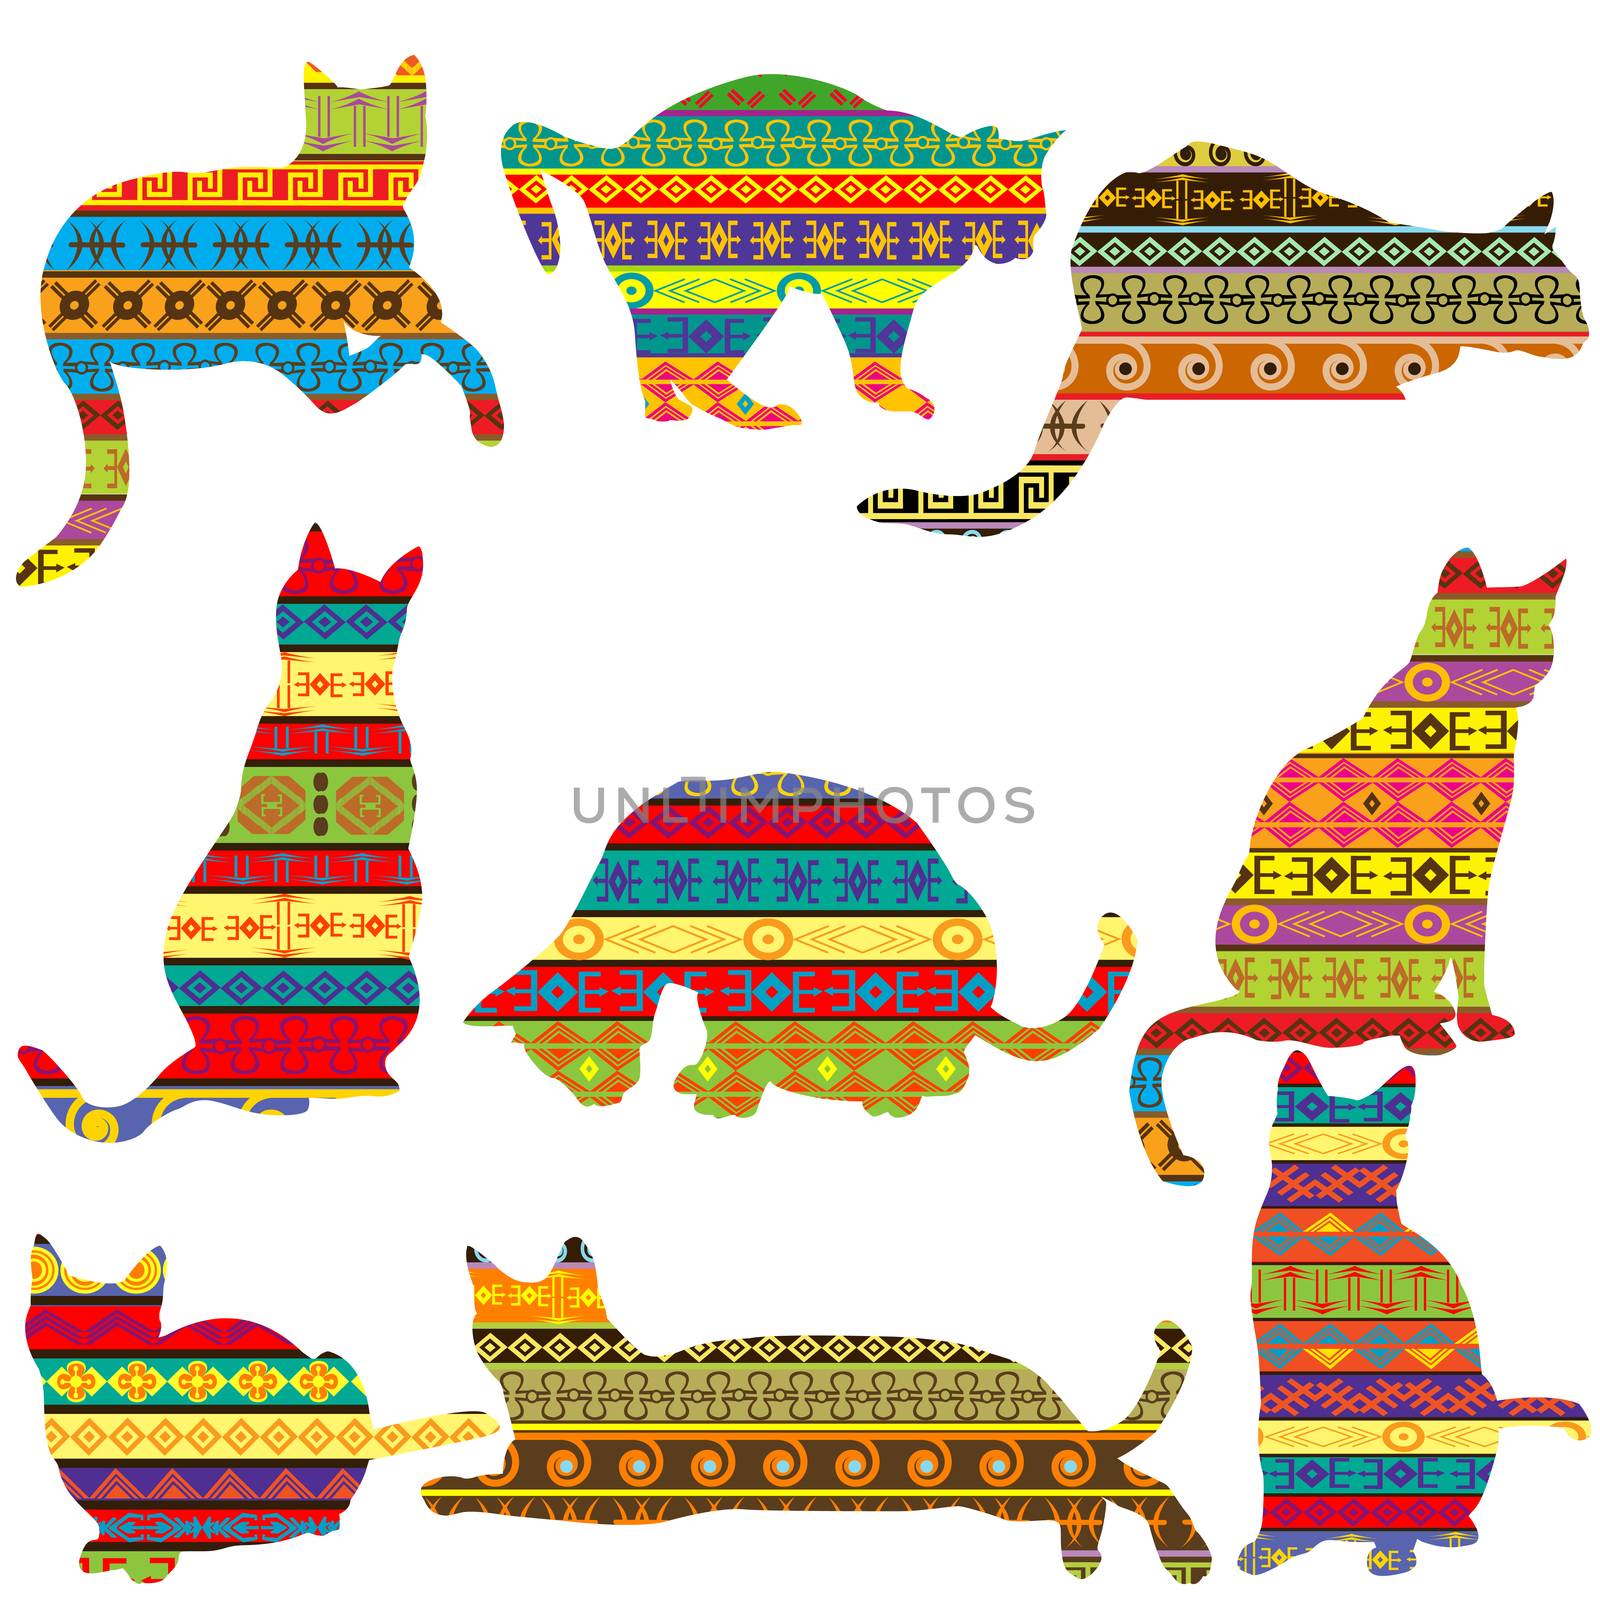 Ethnic decorative patterned cats by hibrida13